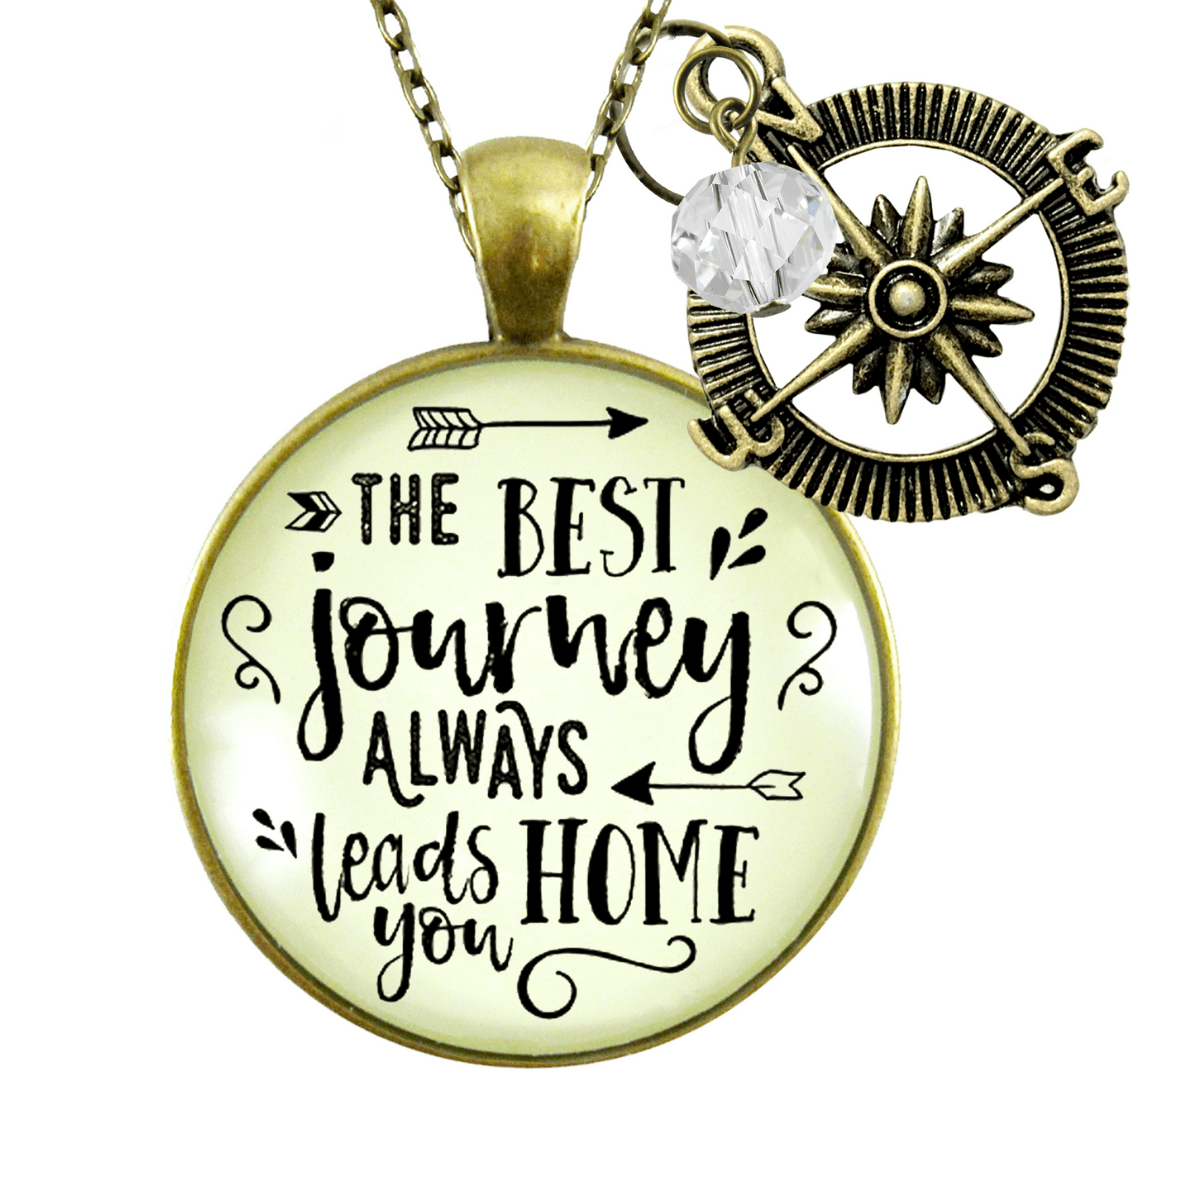 Gutsy Goodness The Best Journey Leads Home Adventure Necklace Life Compass Charm - Gutsy Goodness Handmade Jewelry;The Best Journey Leads Home Adventure Necklace Life Compass Charm - Gutsy Goodness Handmade Jewelry Gifts